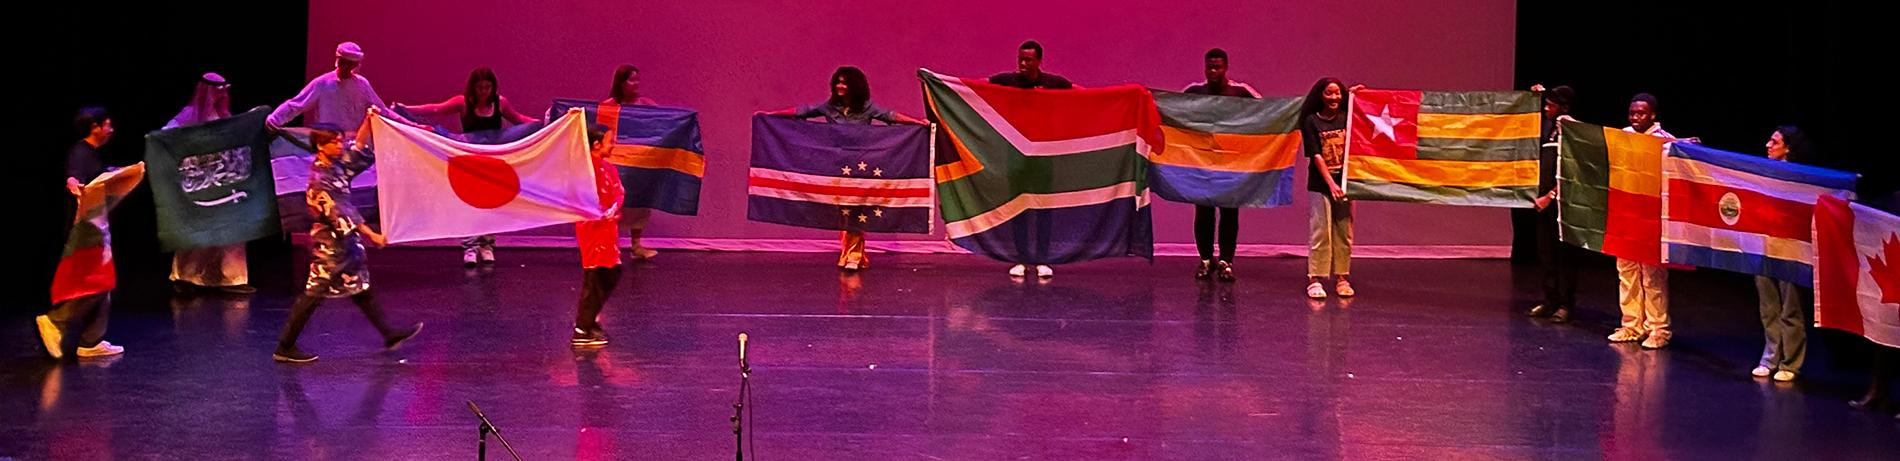 international students on stage holding up their respective flags